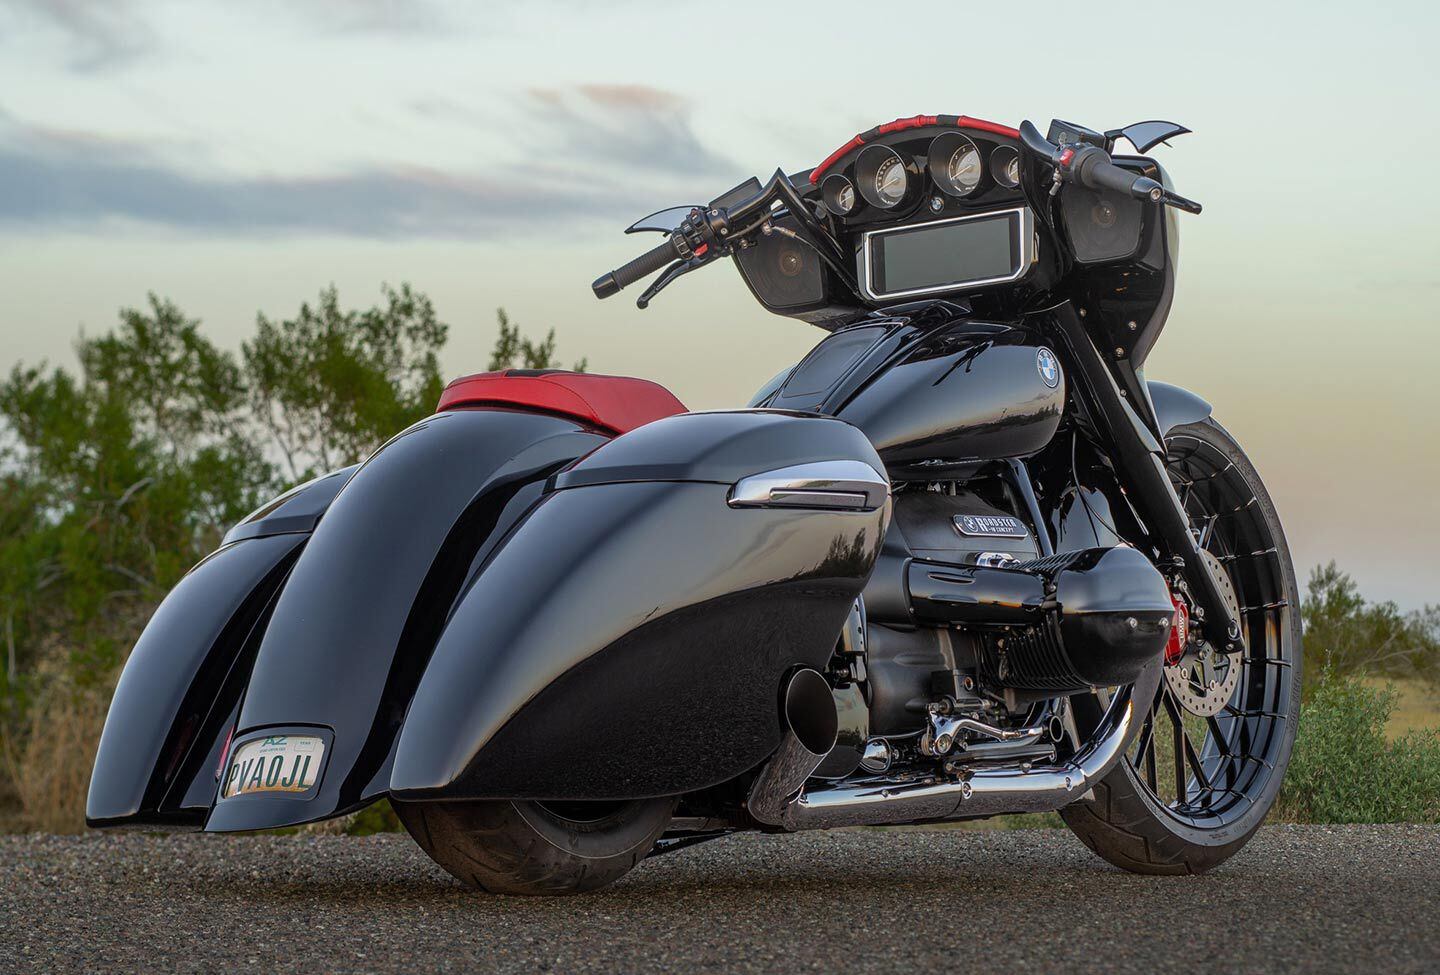 The saddlebags keep their lids, latches, and speakers but wear a new set of  stretched exterior “skins.”  Original rear fender is surgically altered thanks to a second R 18 rear fender grafted on. Clearly, the Transcontinental’s original trunk had to get the heave-ho.